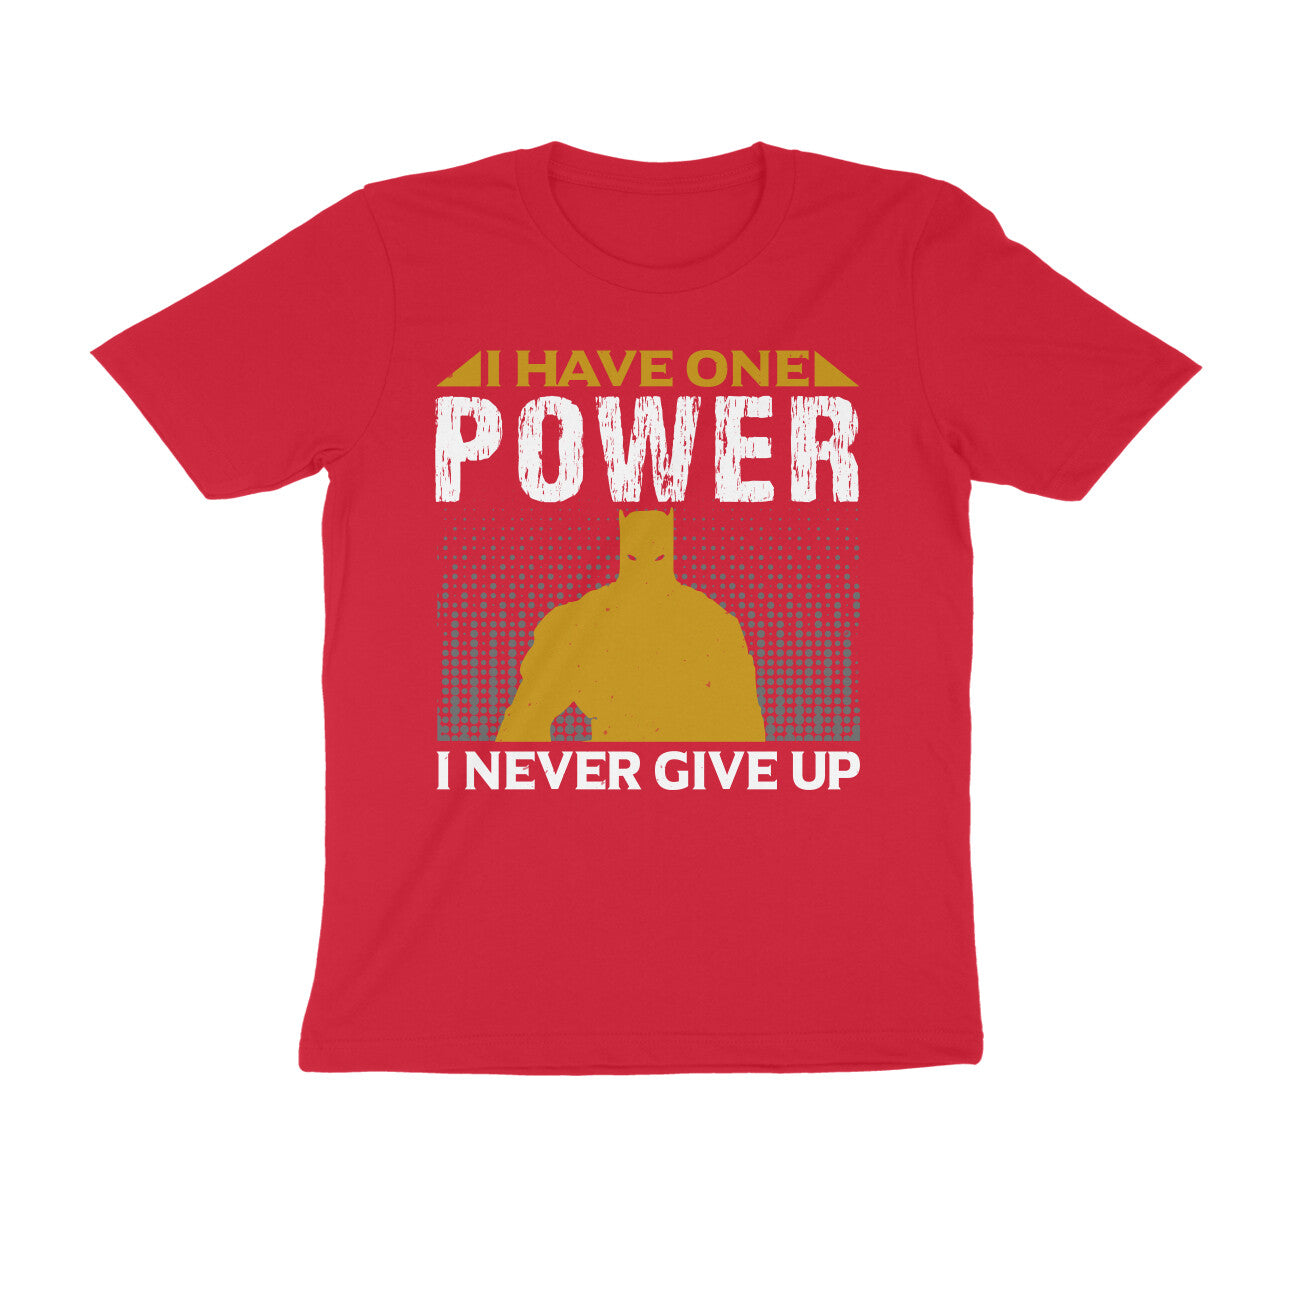 TNH - Men's Round Neck Tshirt - Never Give Up